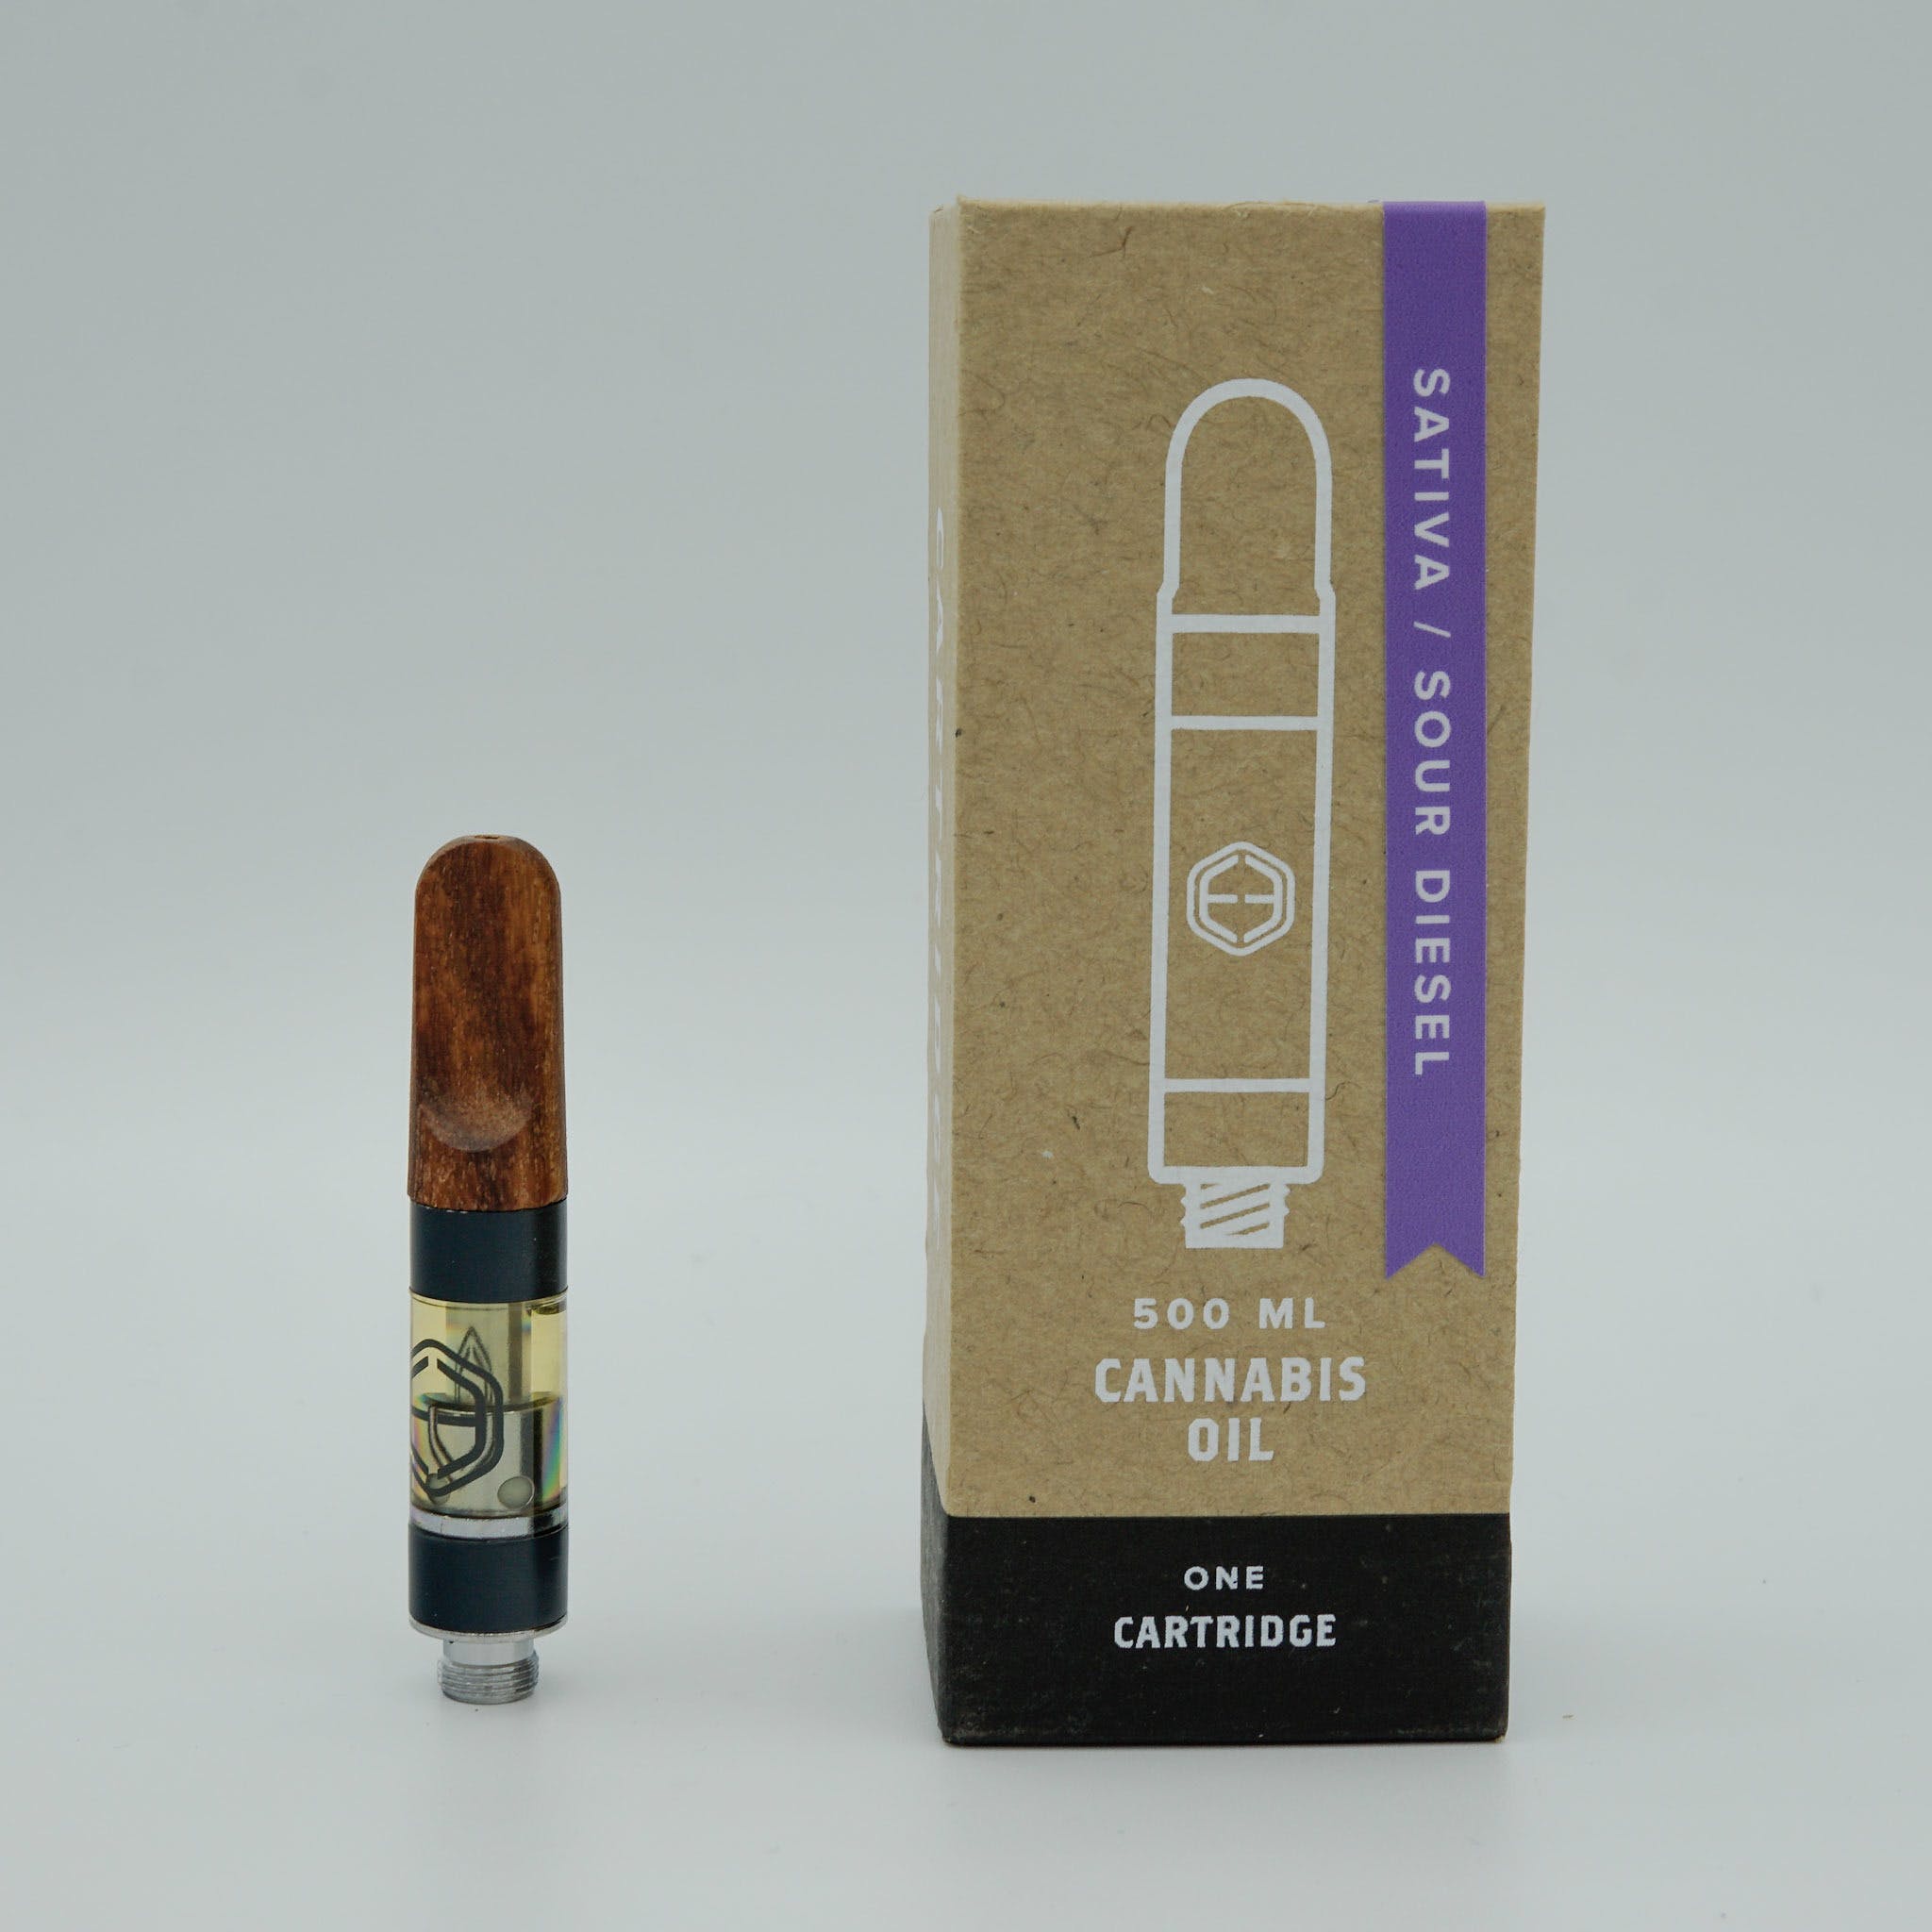 Sour Diesel Cartridges by Element Extracts